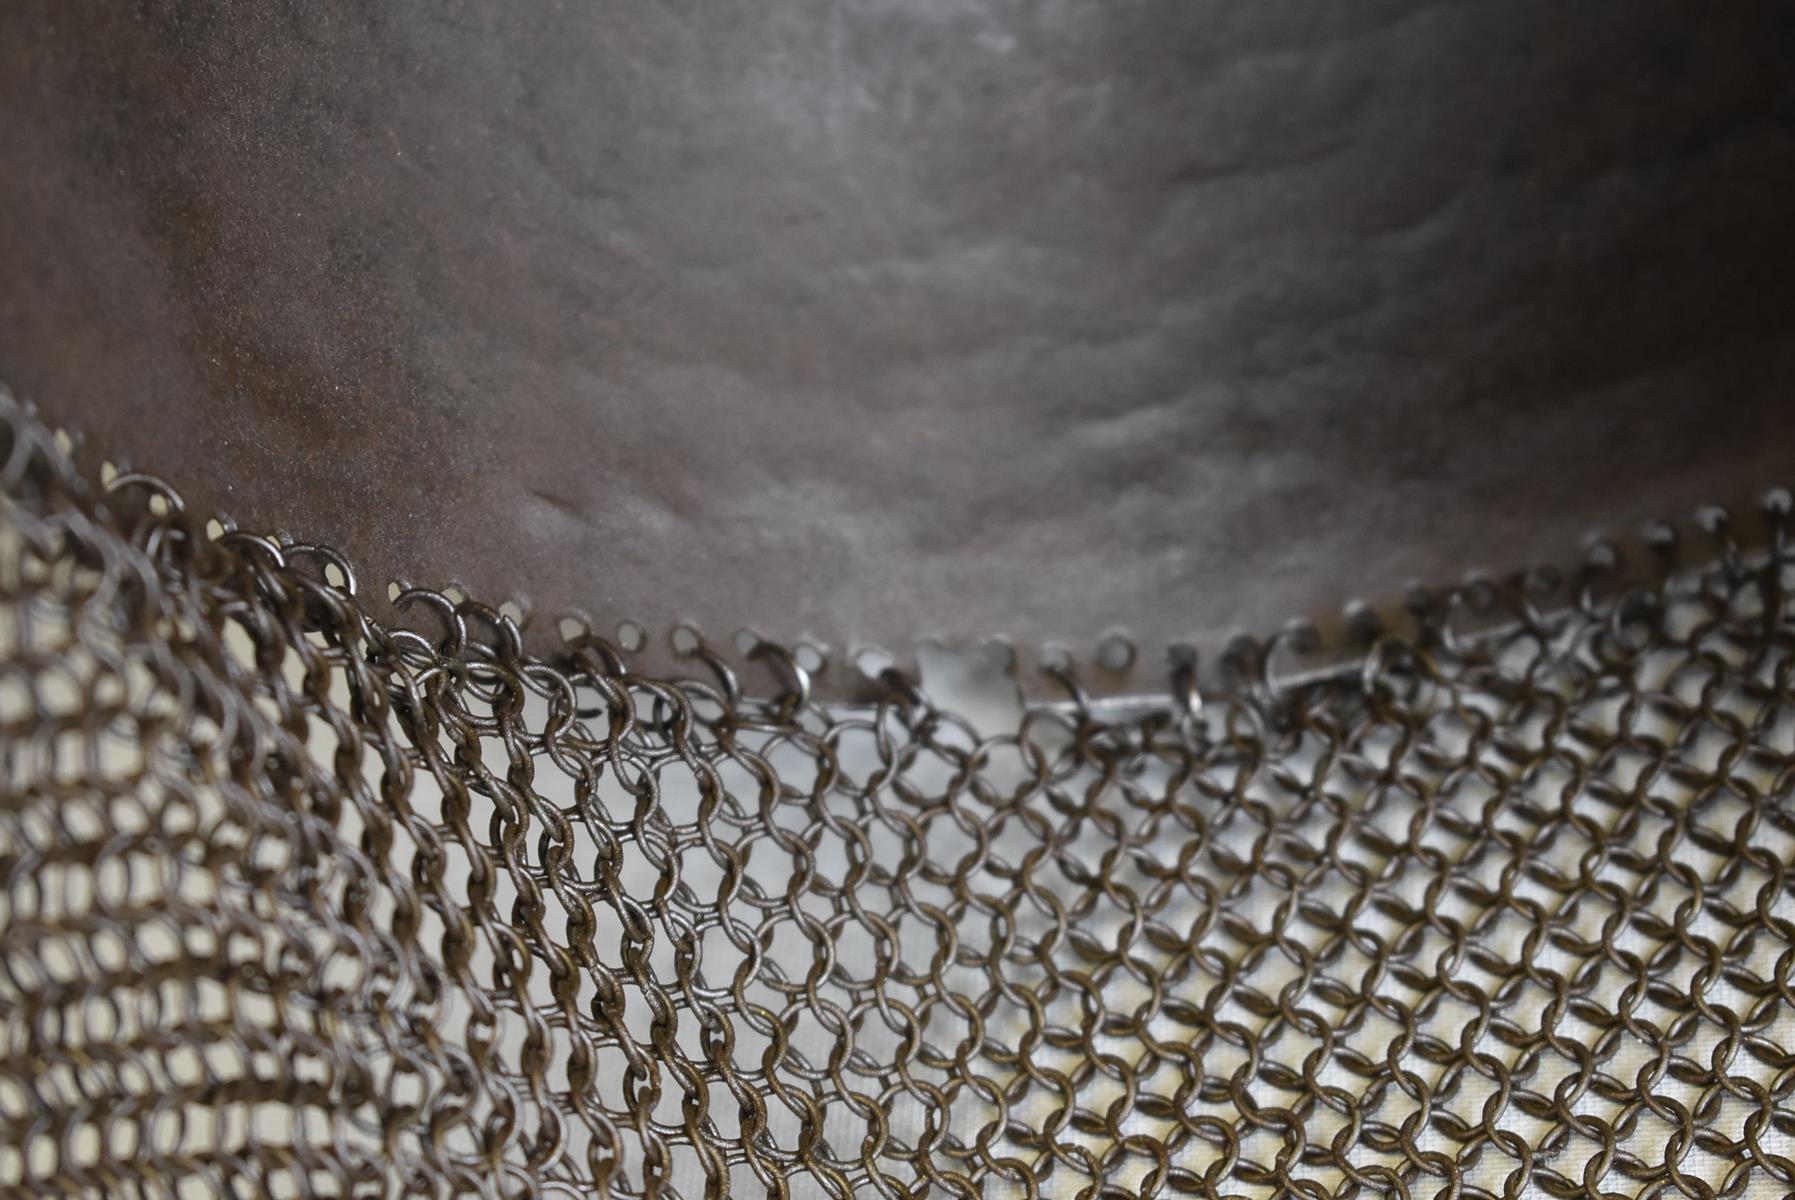 A LATE 18TH OR EARLY 19TH CENTURY INDO-PERSIAN KULAH KHUD OR HELMET, the bowl profusely chiselled - Image 7 of 9